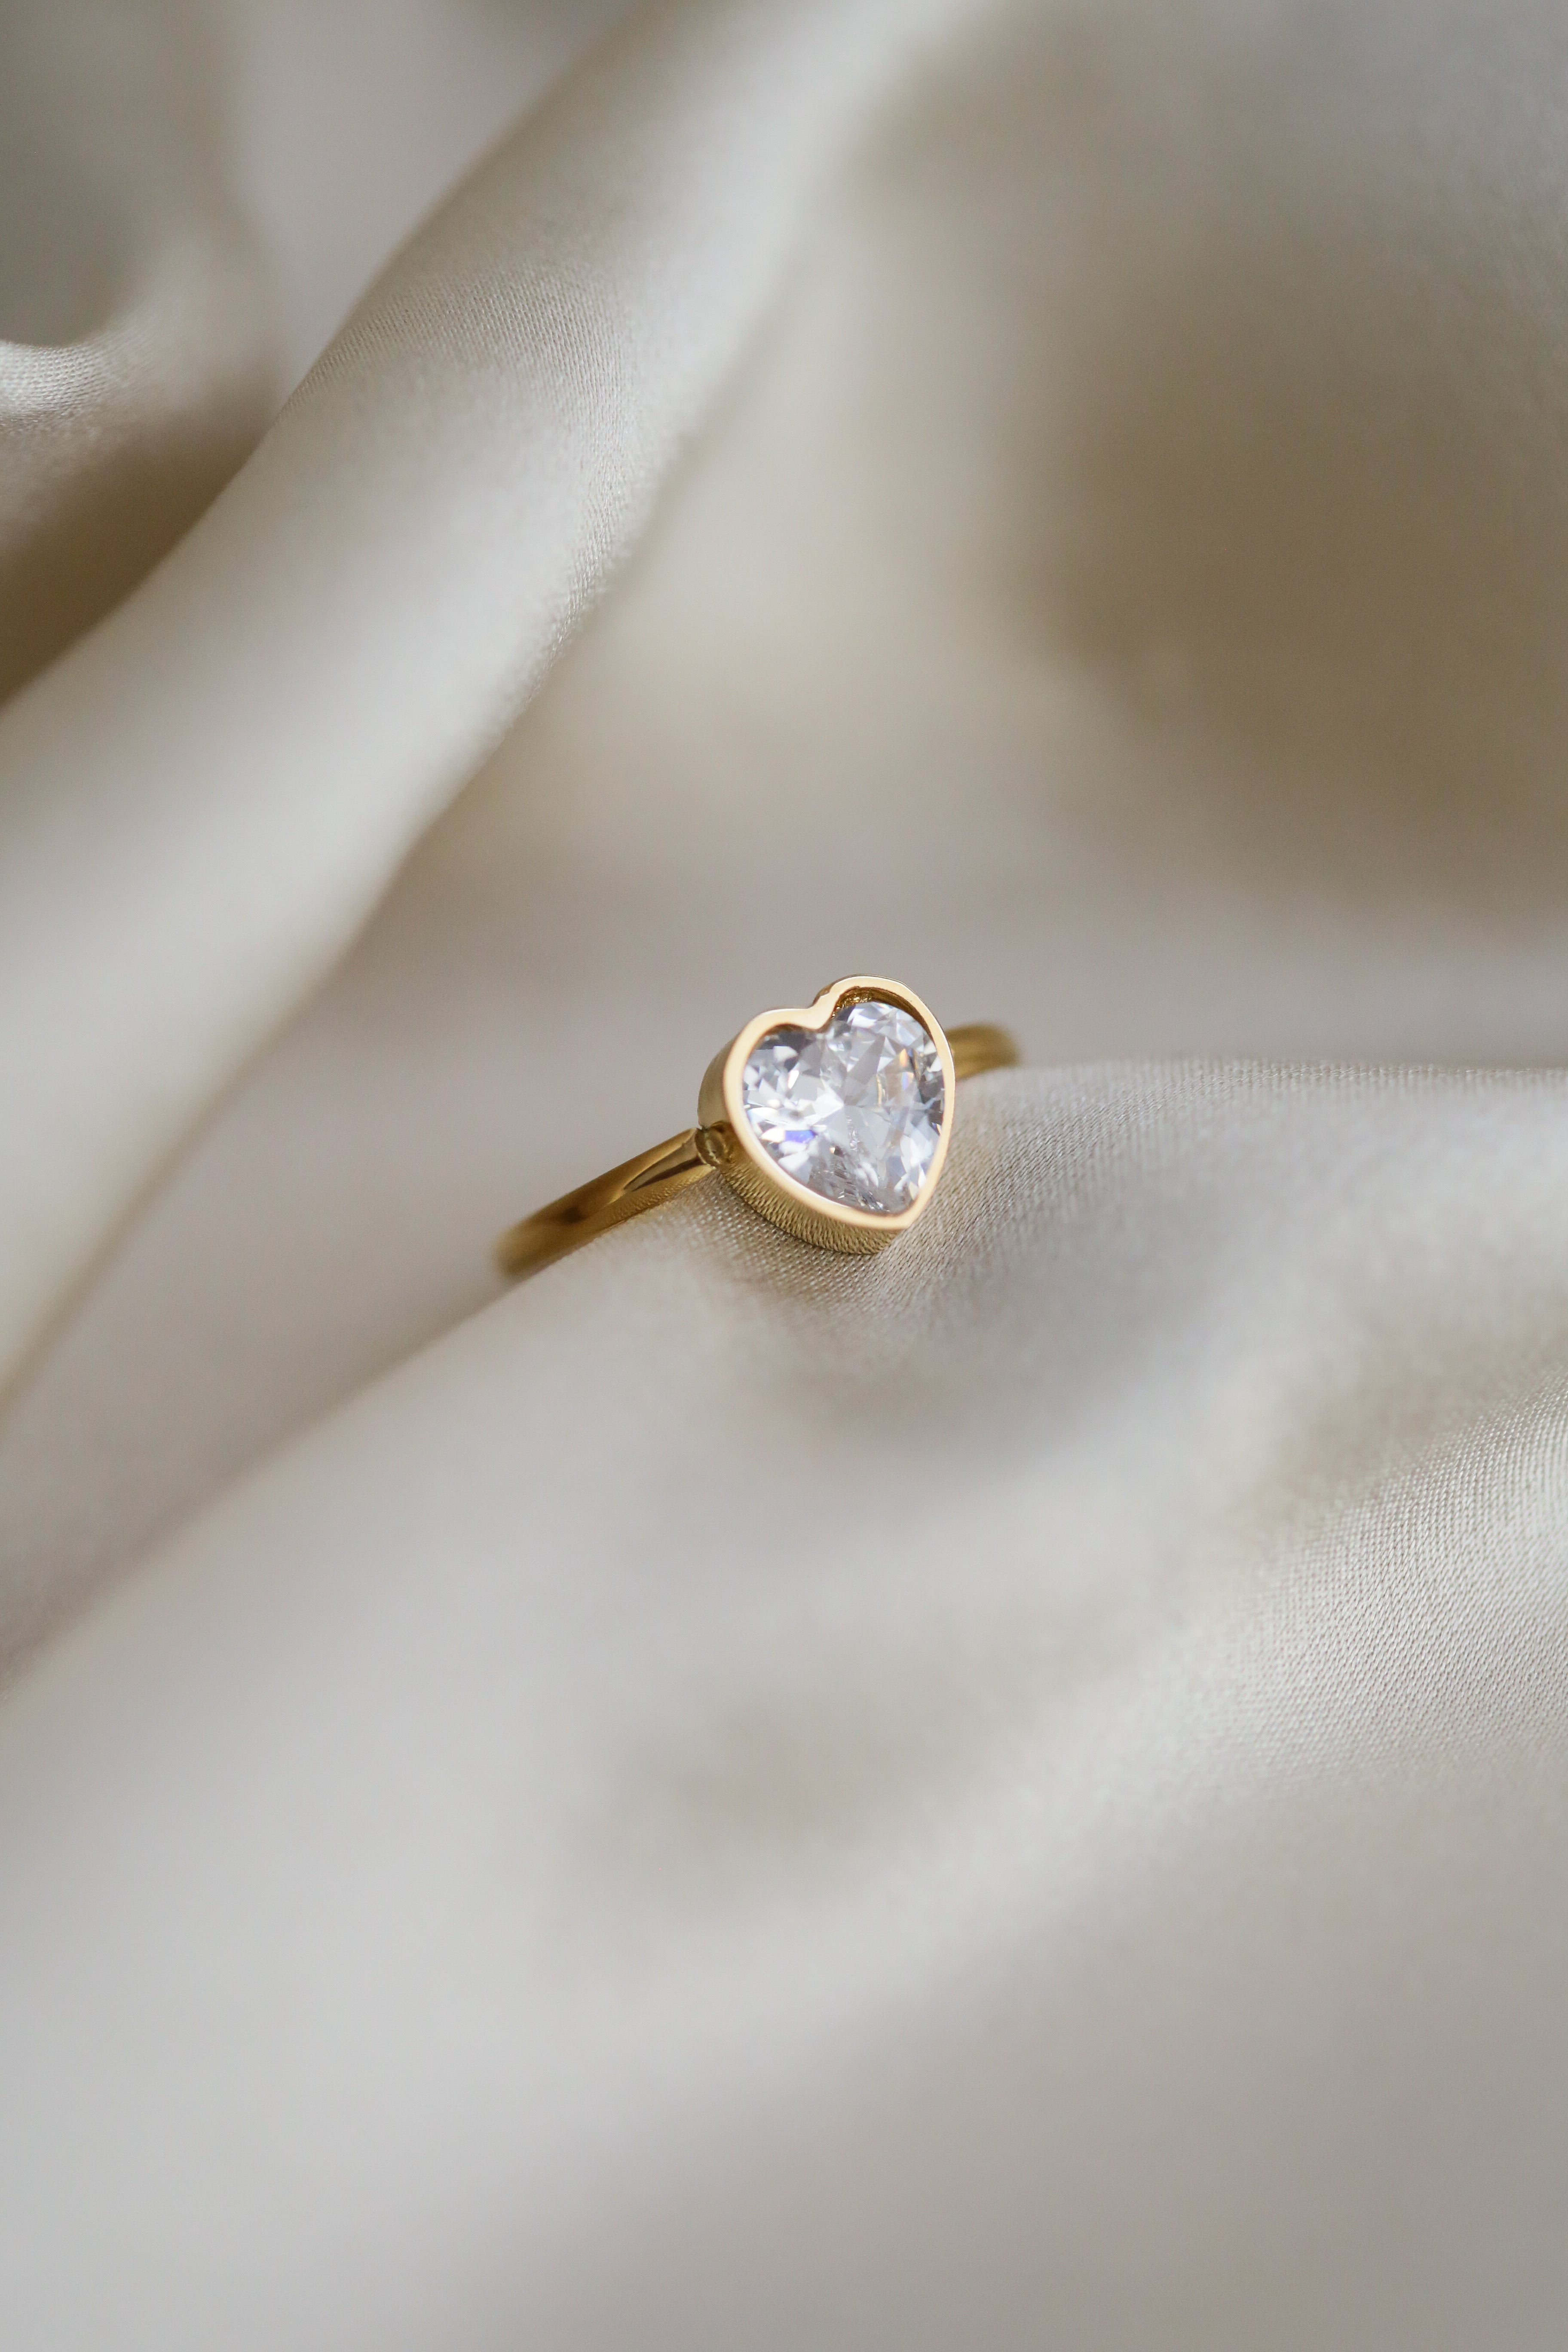 The Heart - Shaped Cubic Zirconia Ring - Boutique Minimaliste has waterproof, durable, elegant and vintage inspired jewelry